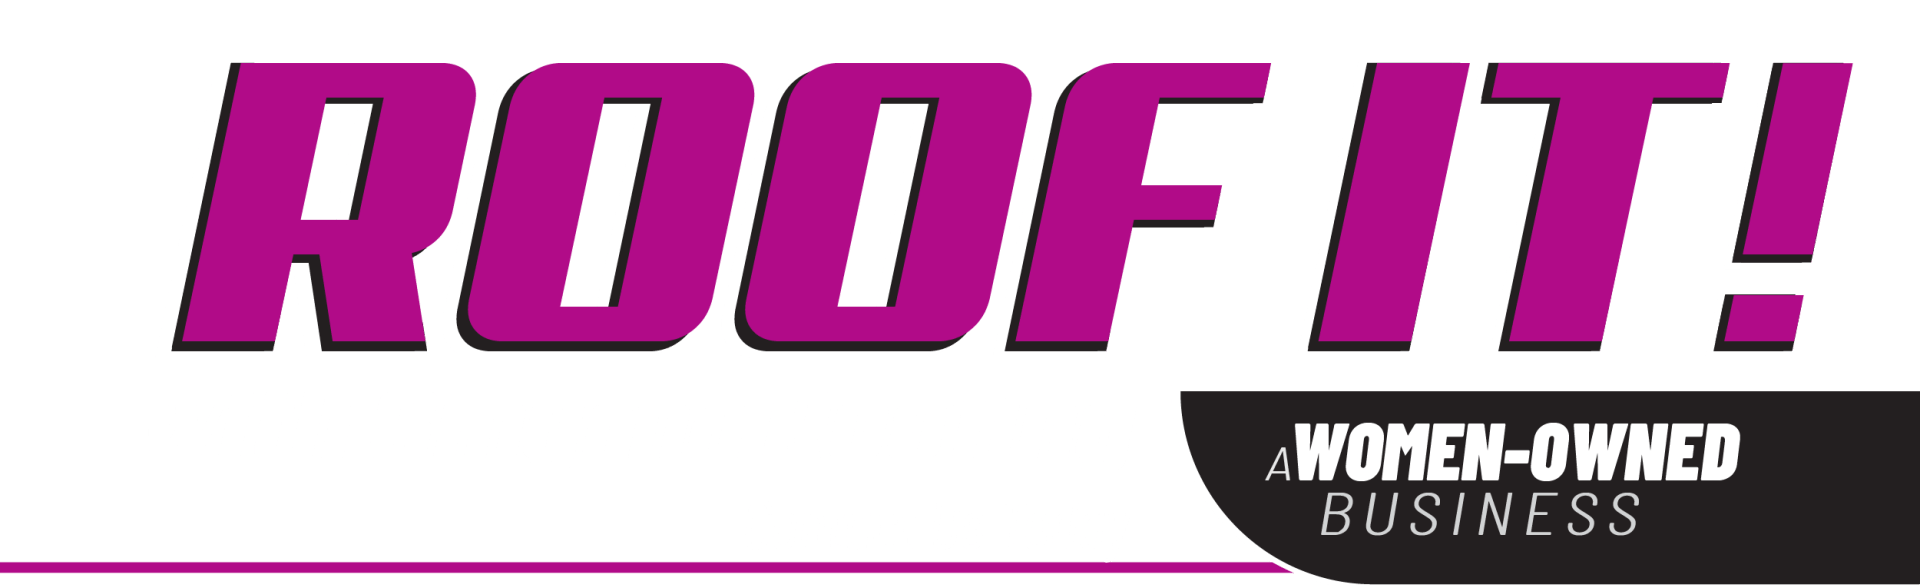 Roof It Today roofing company in Delaware